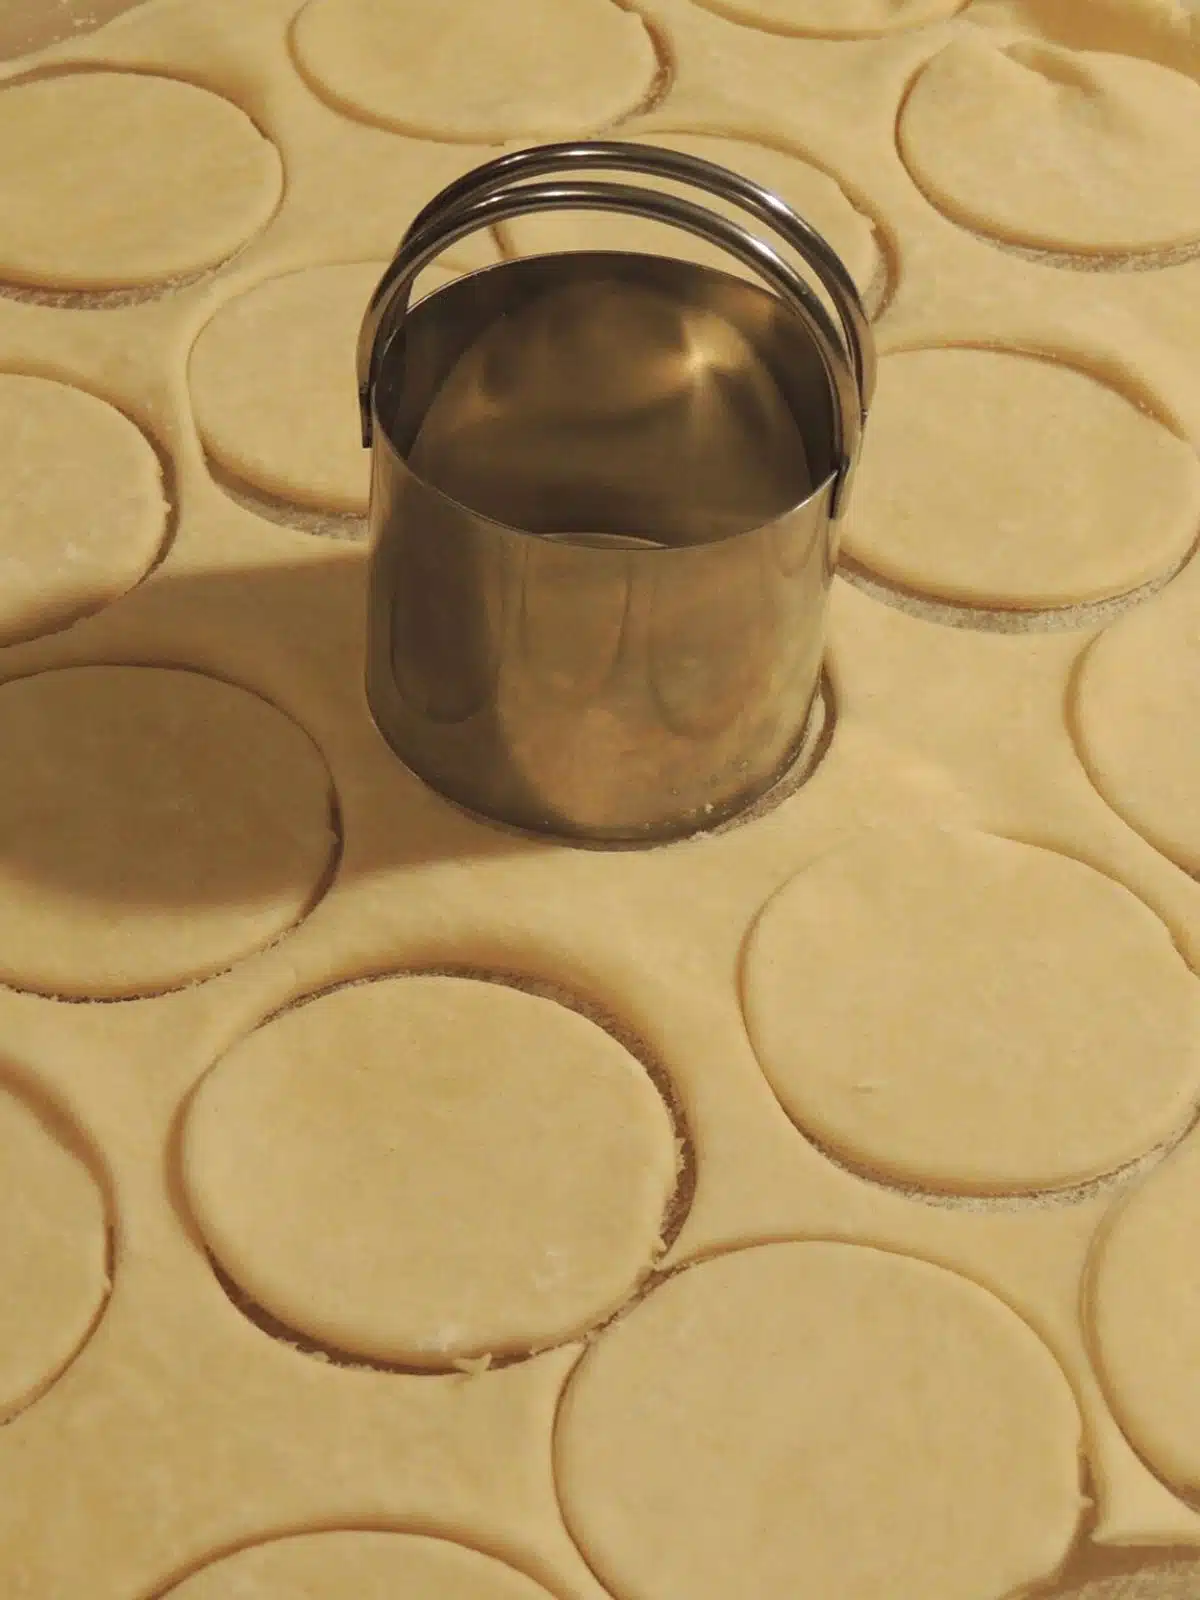 Use a biscuit cutter to cut out round shapes in pie crust dough.